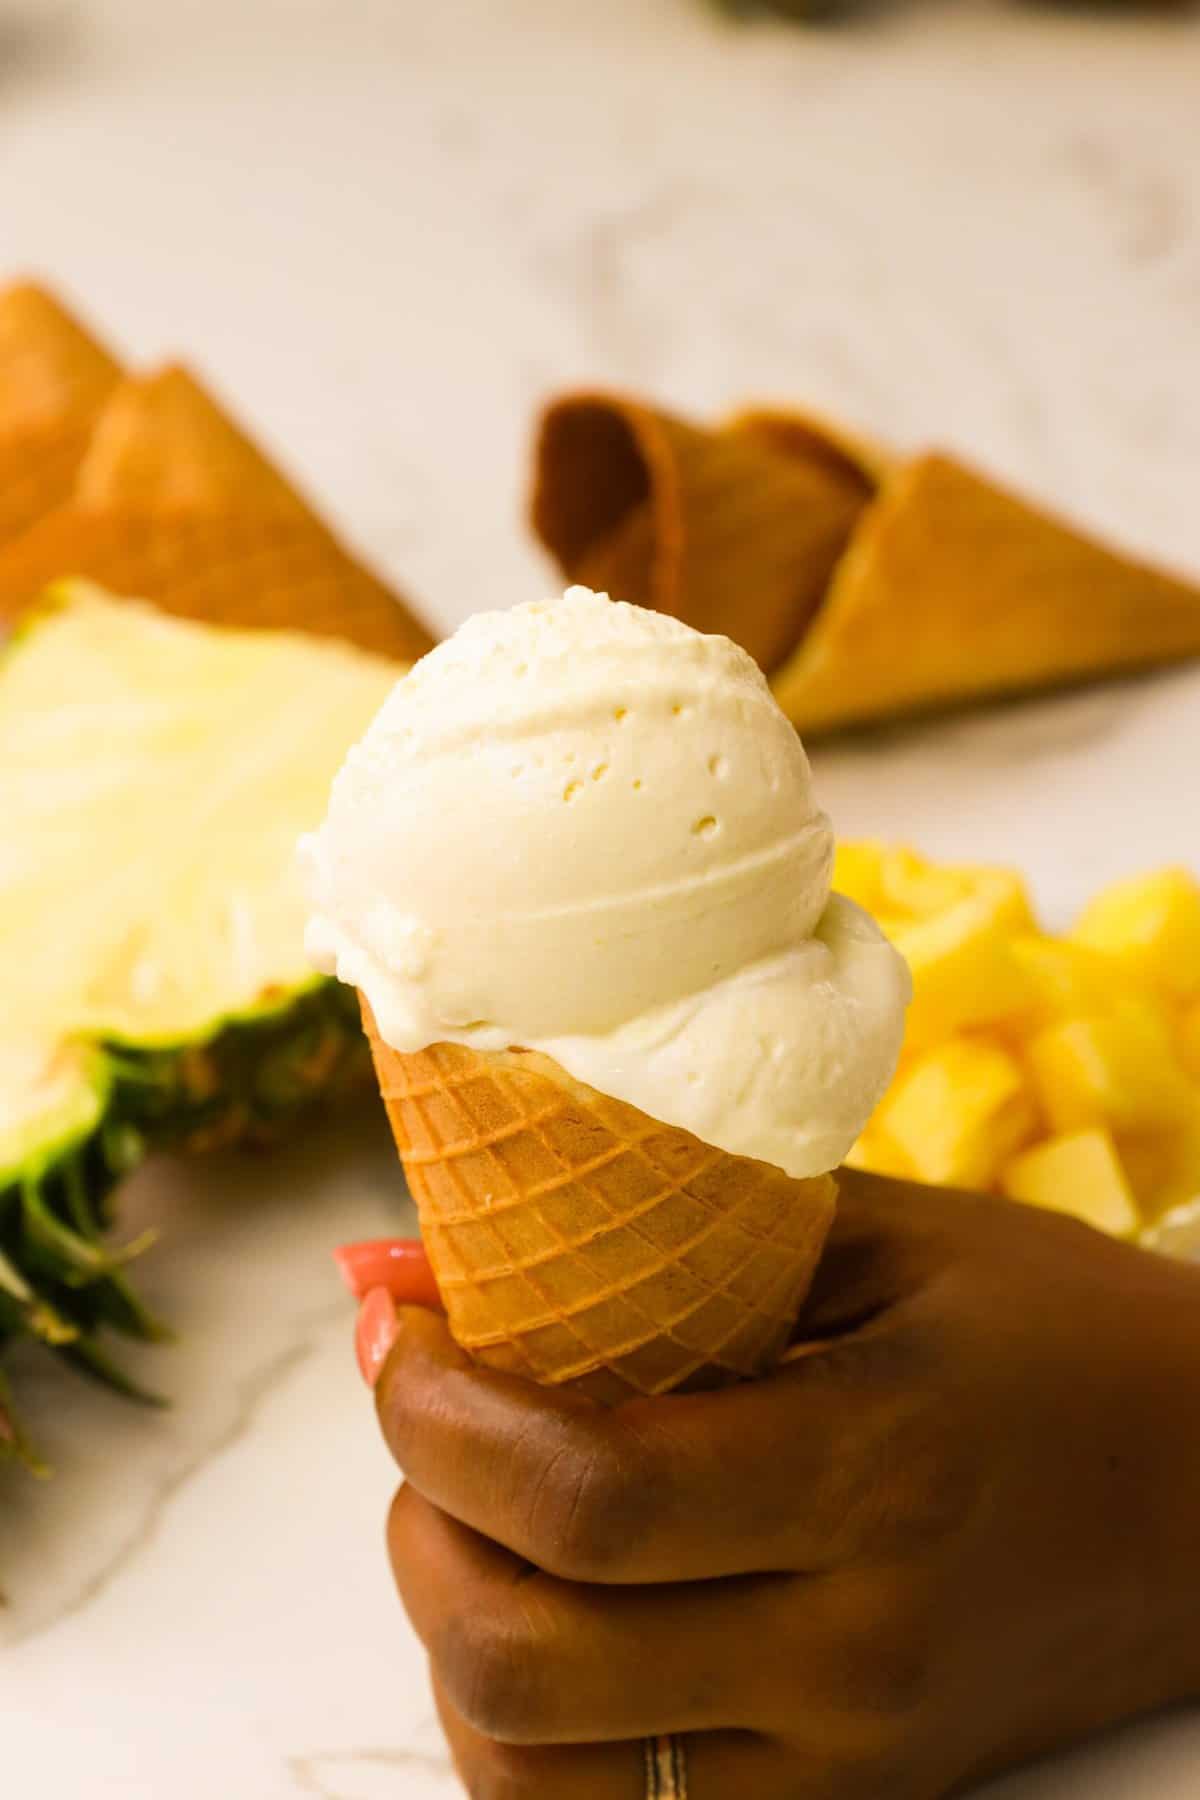 Filling a cone with tasty homemade pineapple ice cream